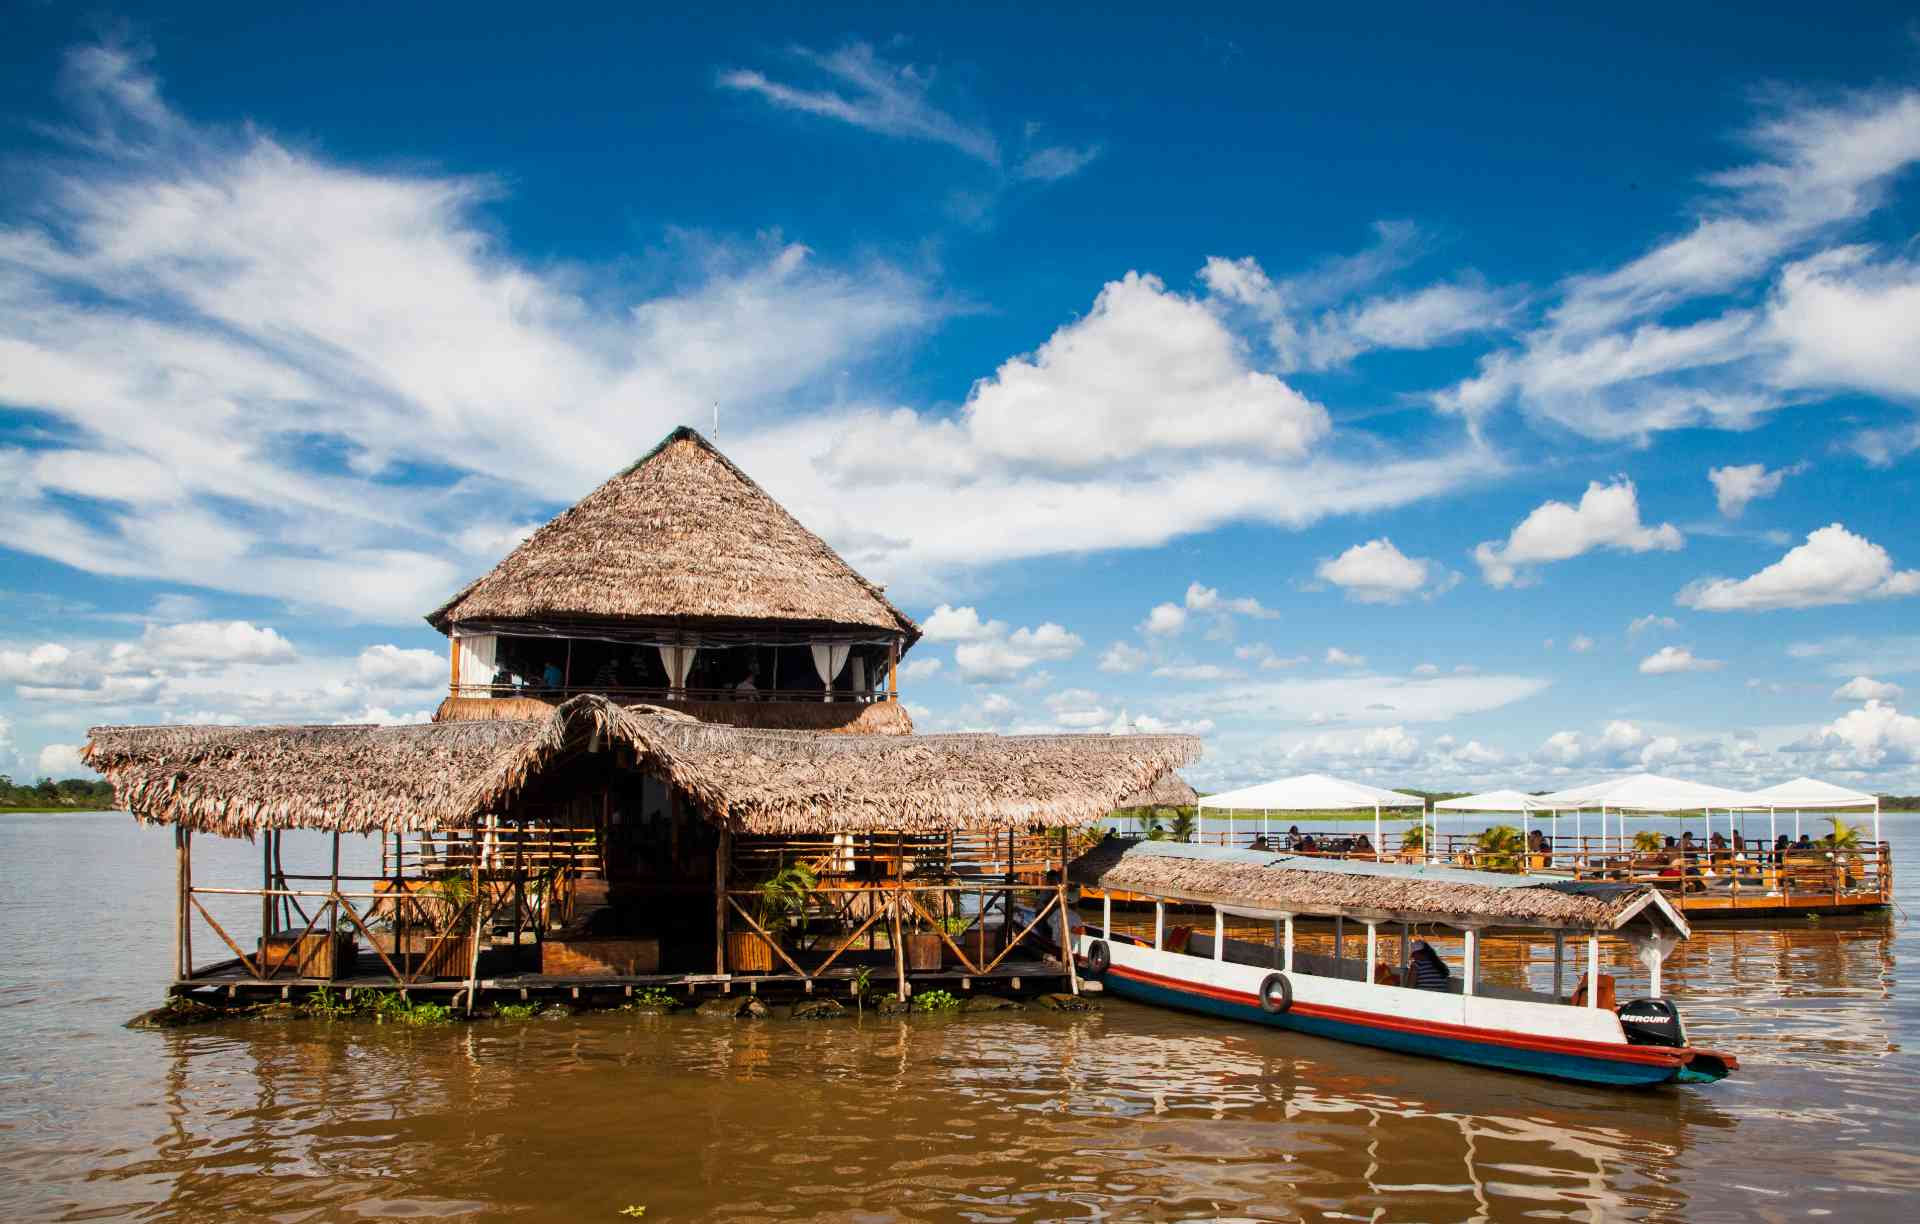 Excellent Things To Do In Iquitos, Peru